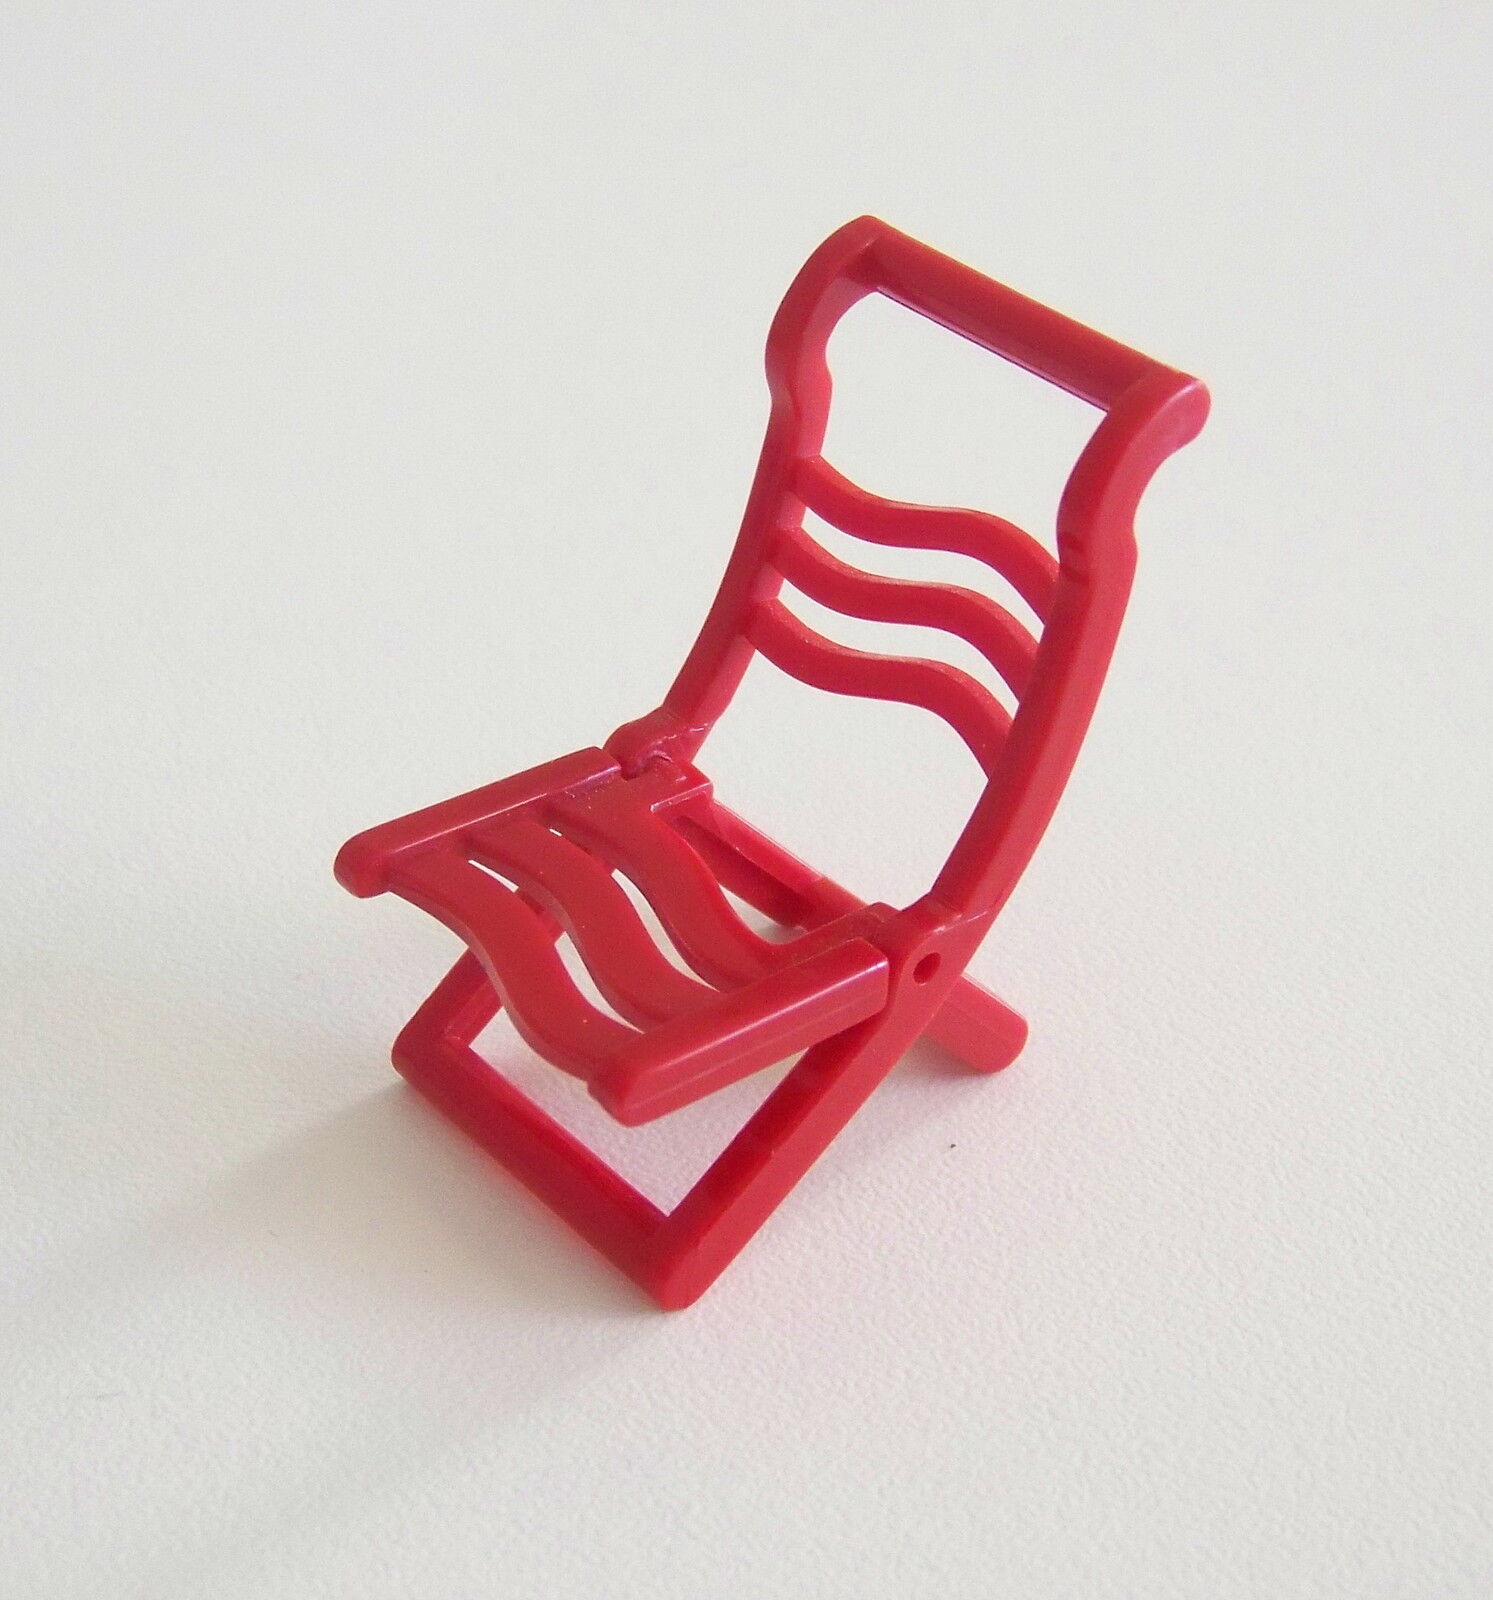 PLAYMOBIL (V196) LEISURE - red folding chair with top garden back